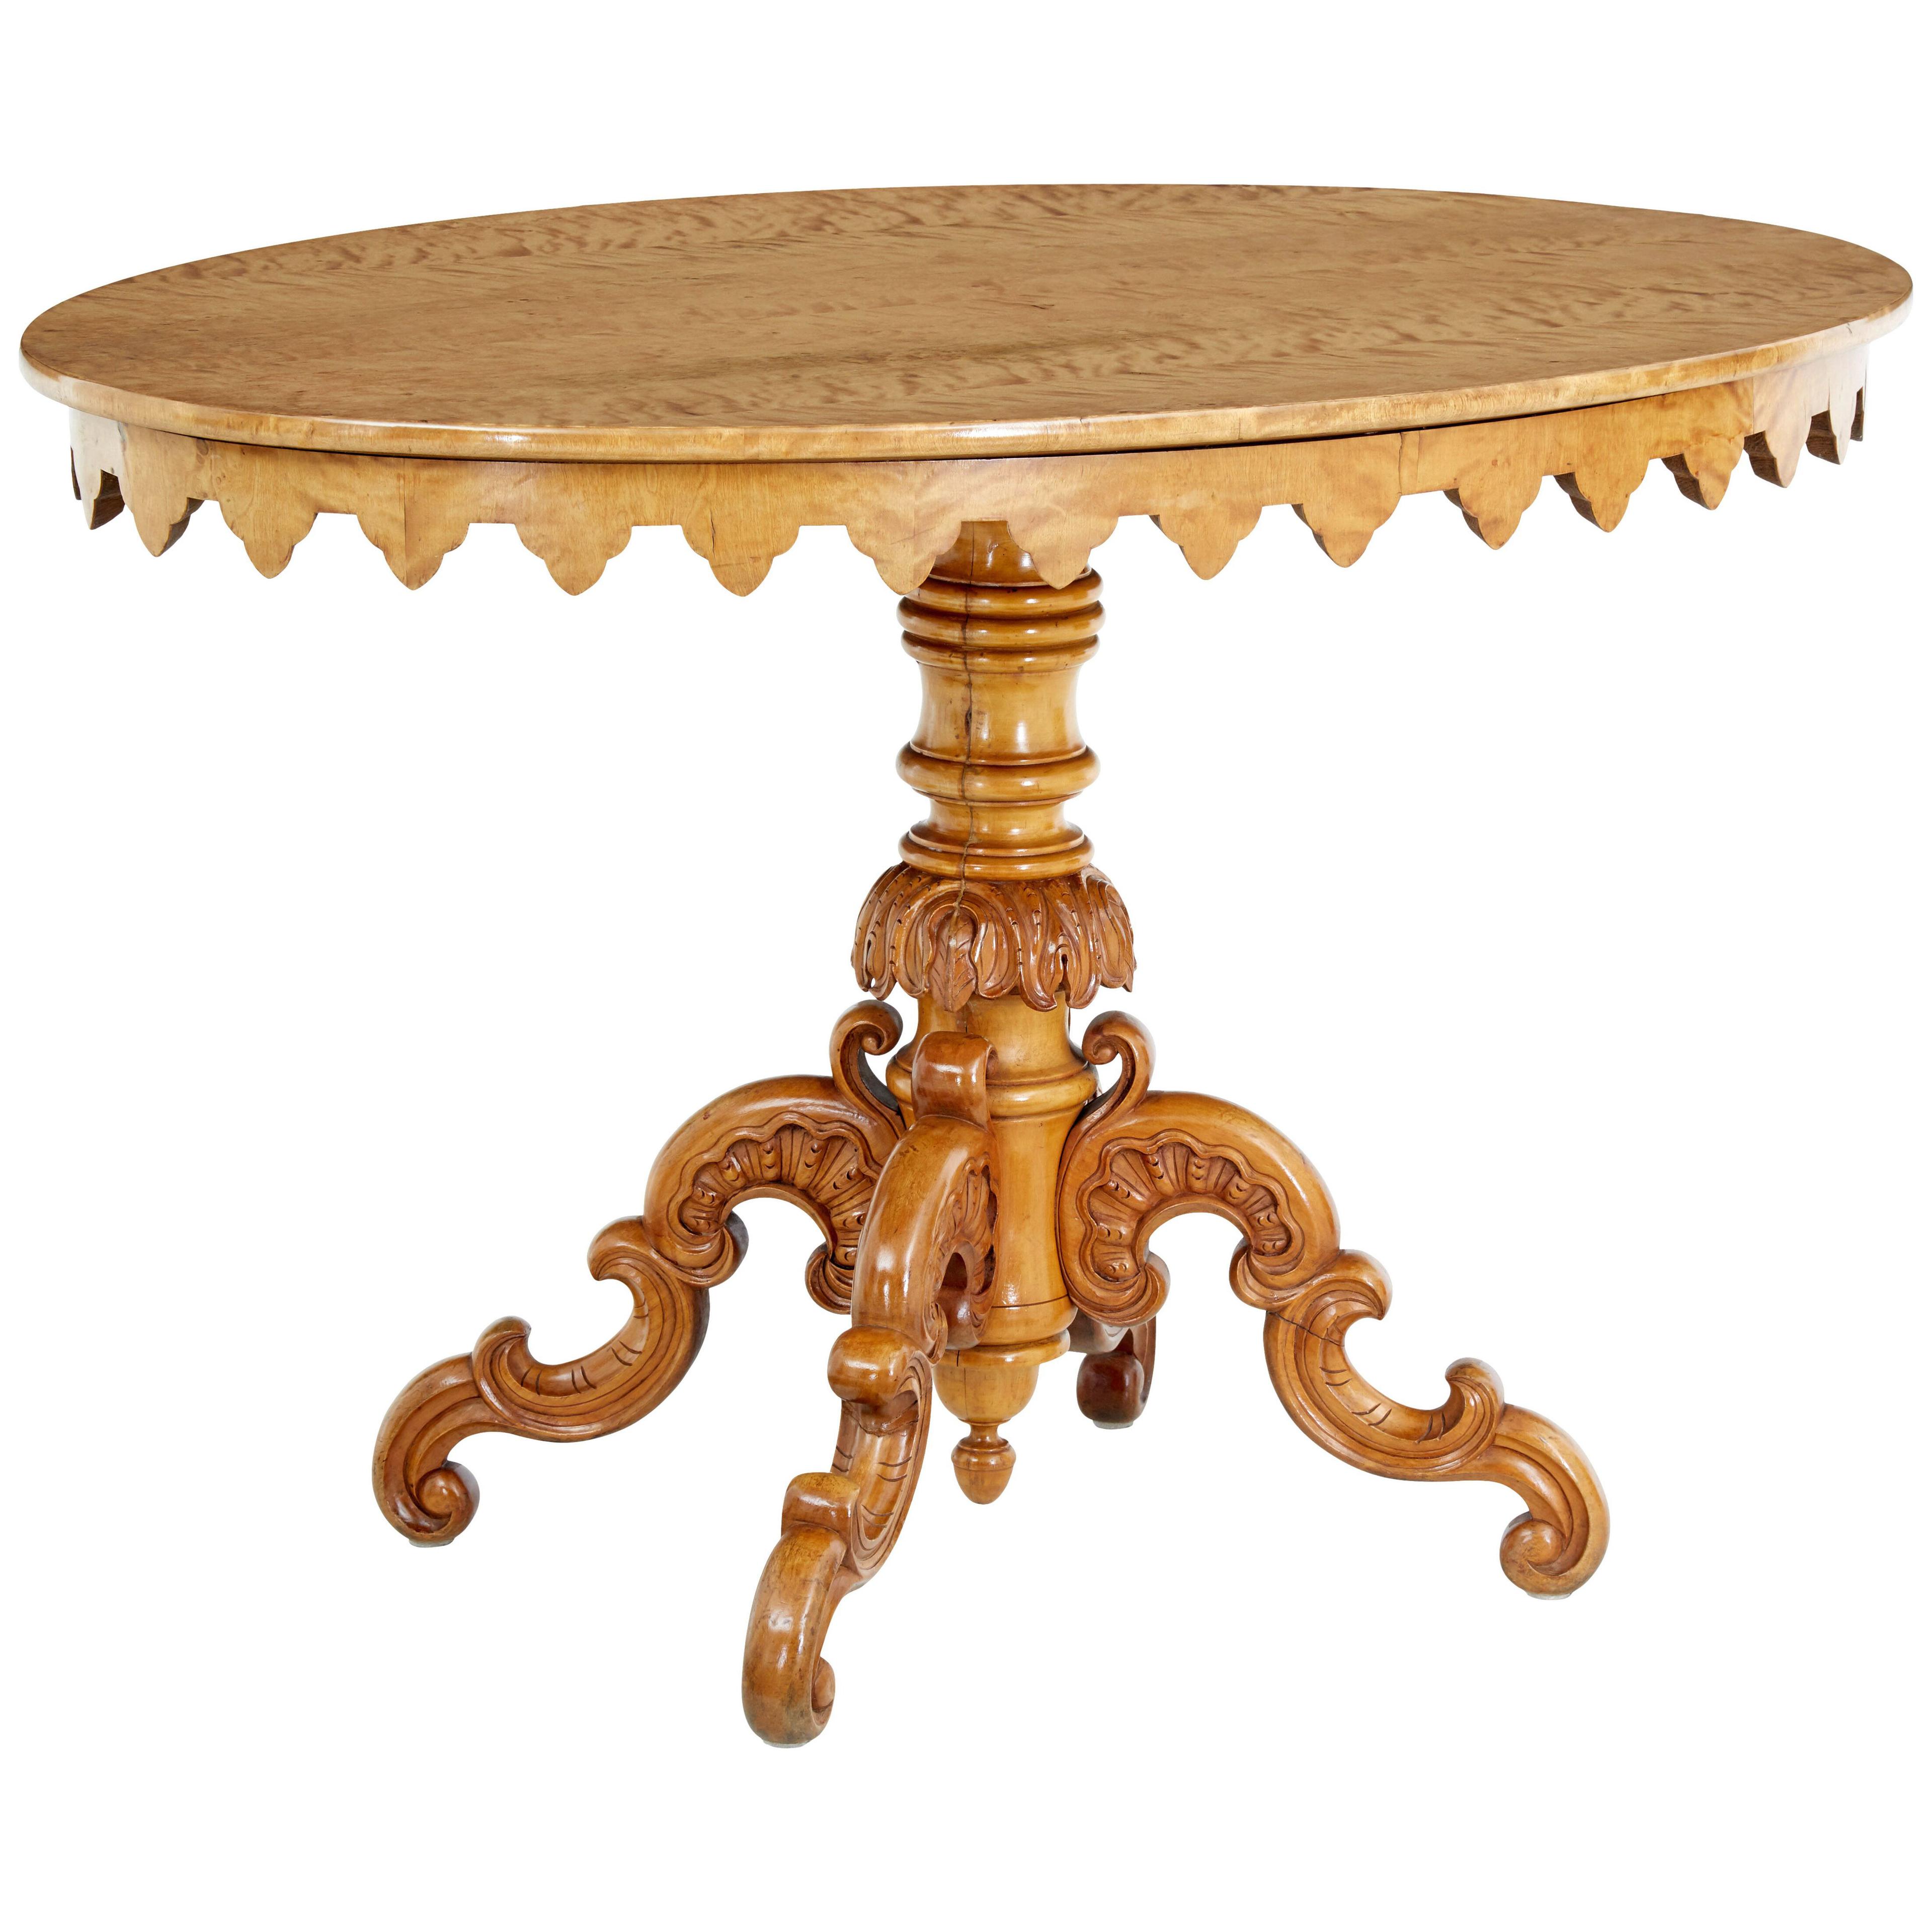 SWEDISH 19TH CENTURY BIRCH OVAL OCCASIONAL TABLE